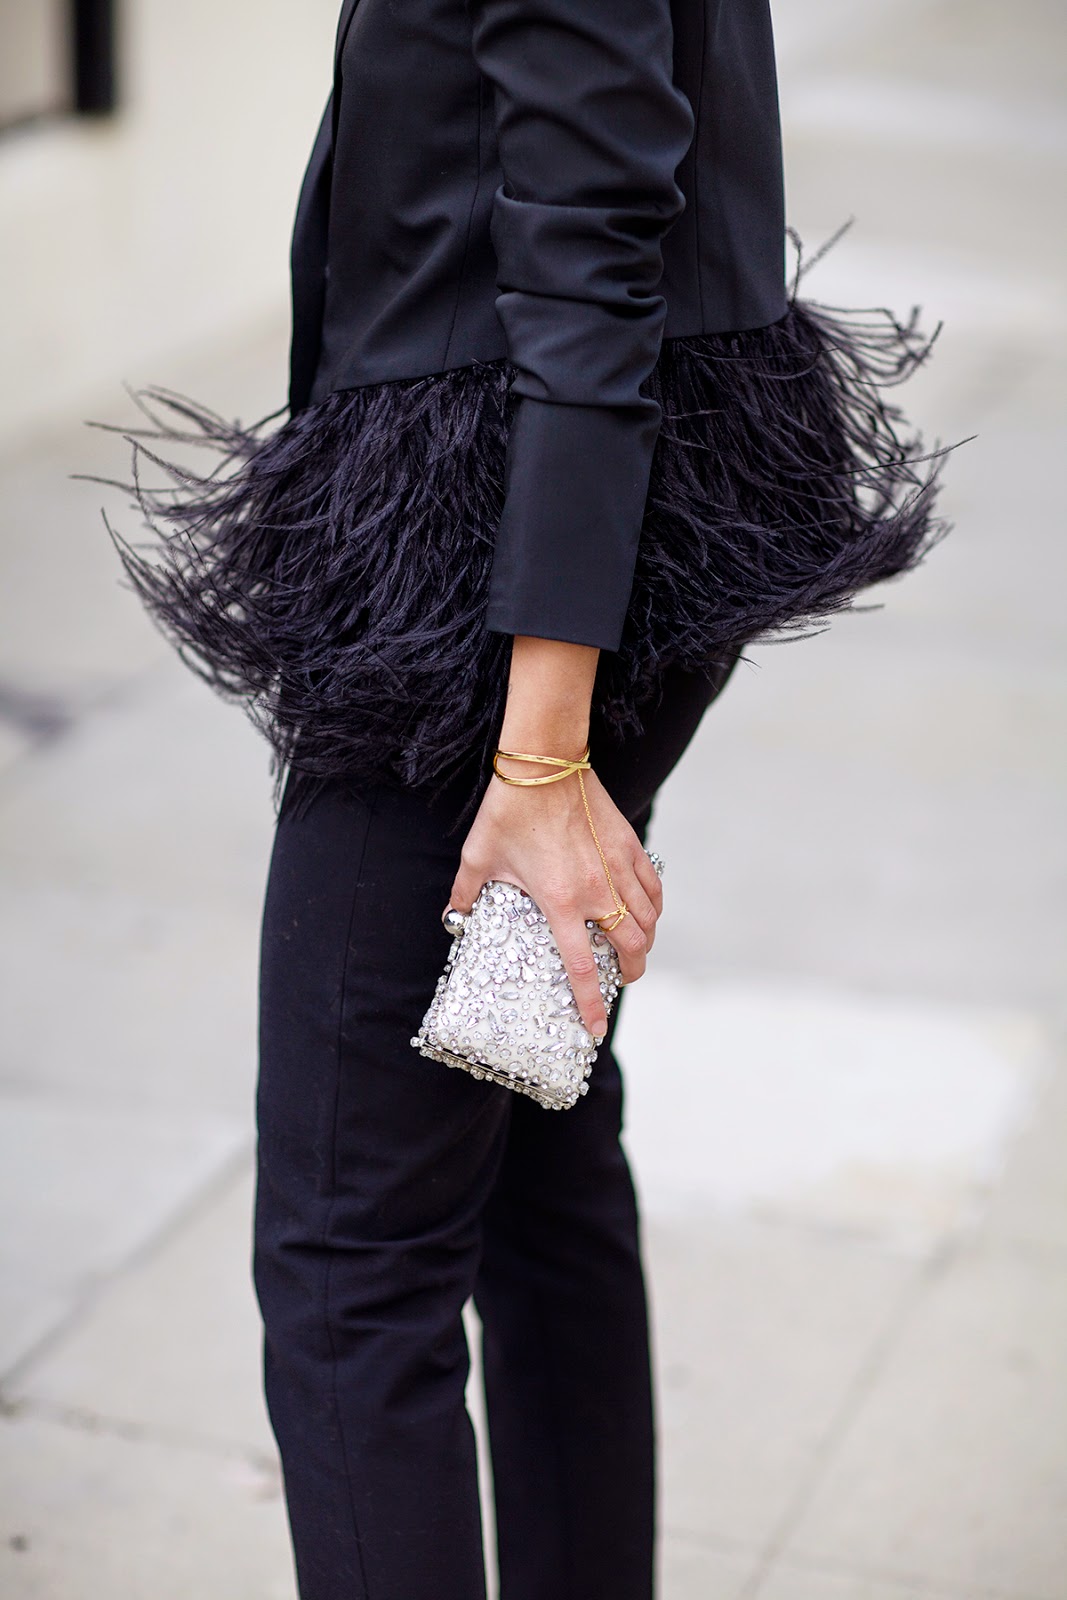 How To Wear Feathers (Without Looking Like A Bird)  Closetful of Clothes